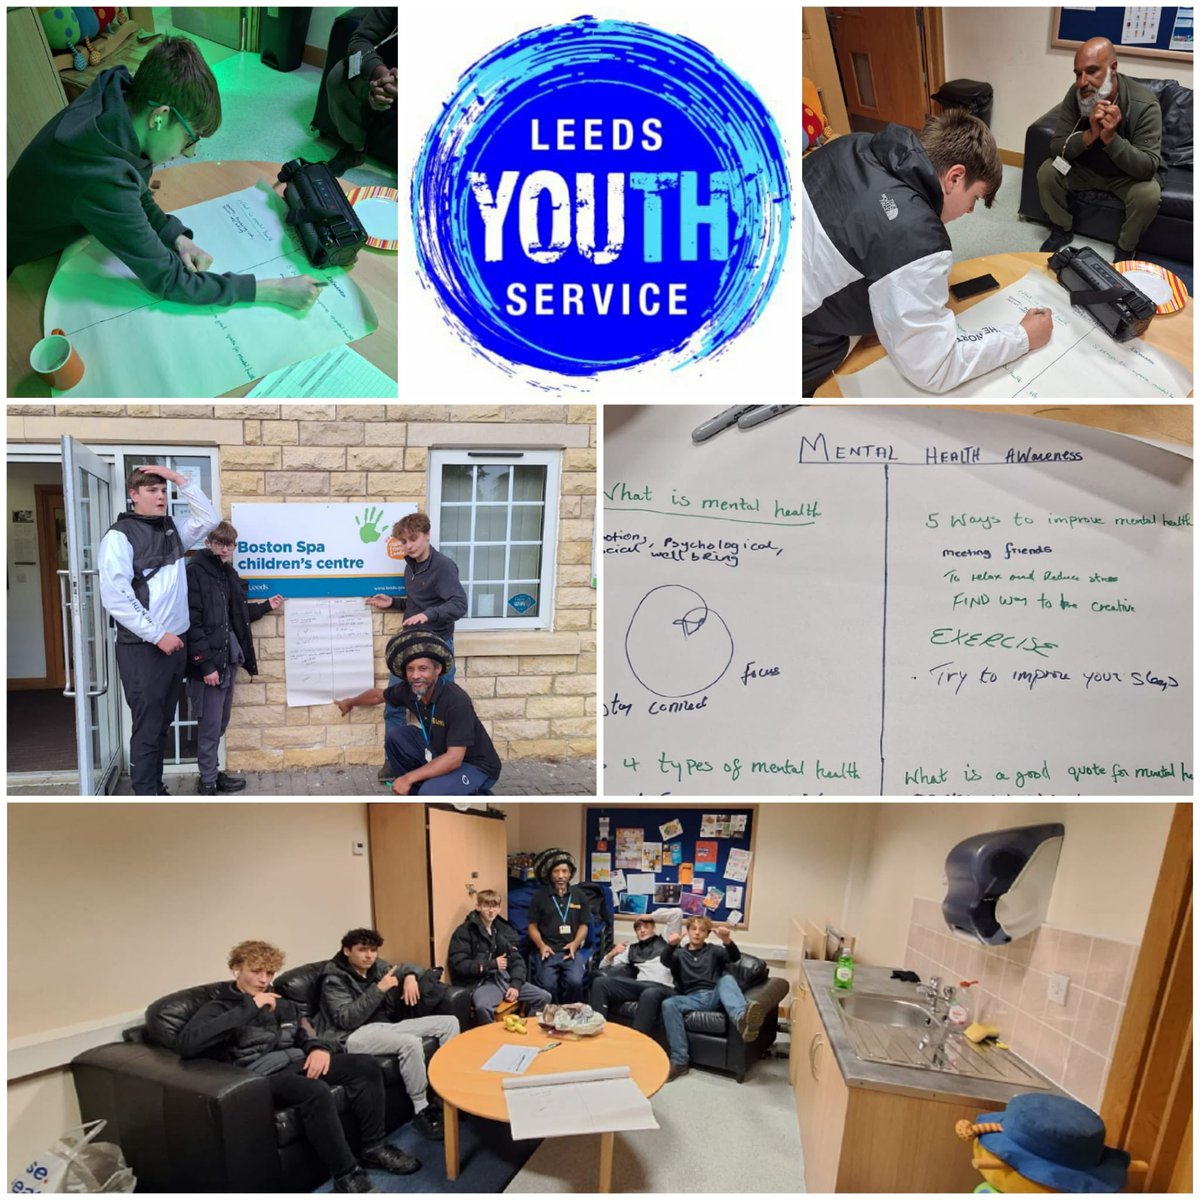 Great session for #MentalHealthAwarenessWeek @
our #BostonSpa YouthClub this evening. 

#Youngpeople discussing what #mentalhealth means to them & things that we can do to improve & sustain positive #wellbeing 

#Youthwork
#LeedsYouthService